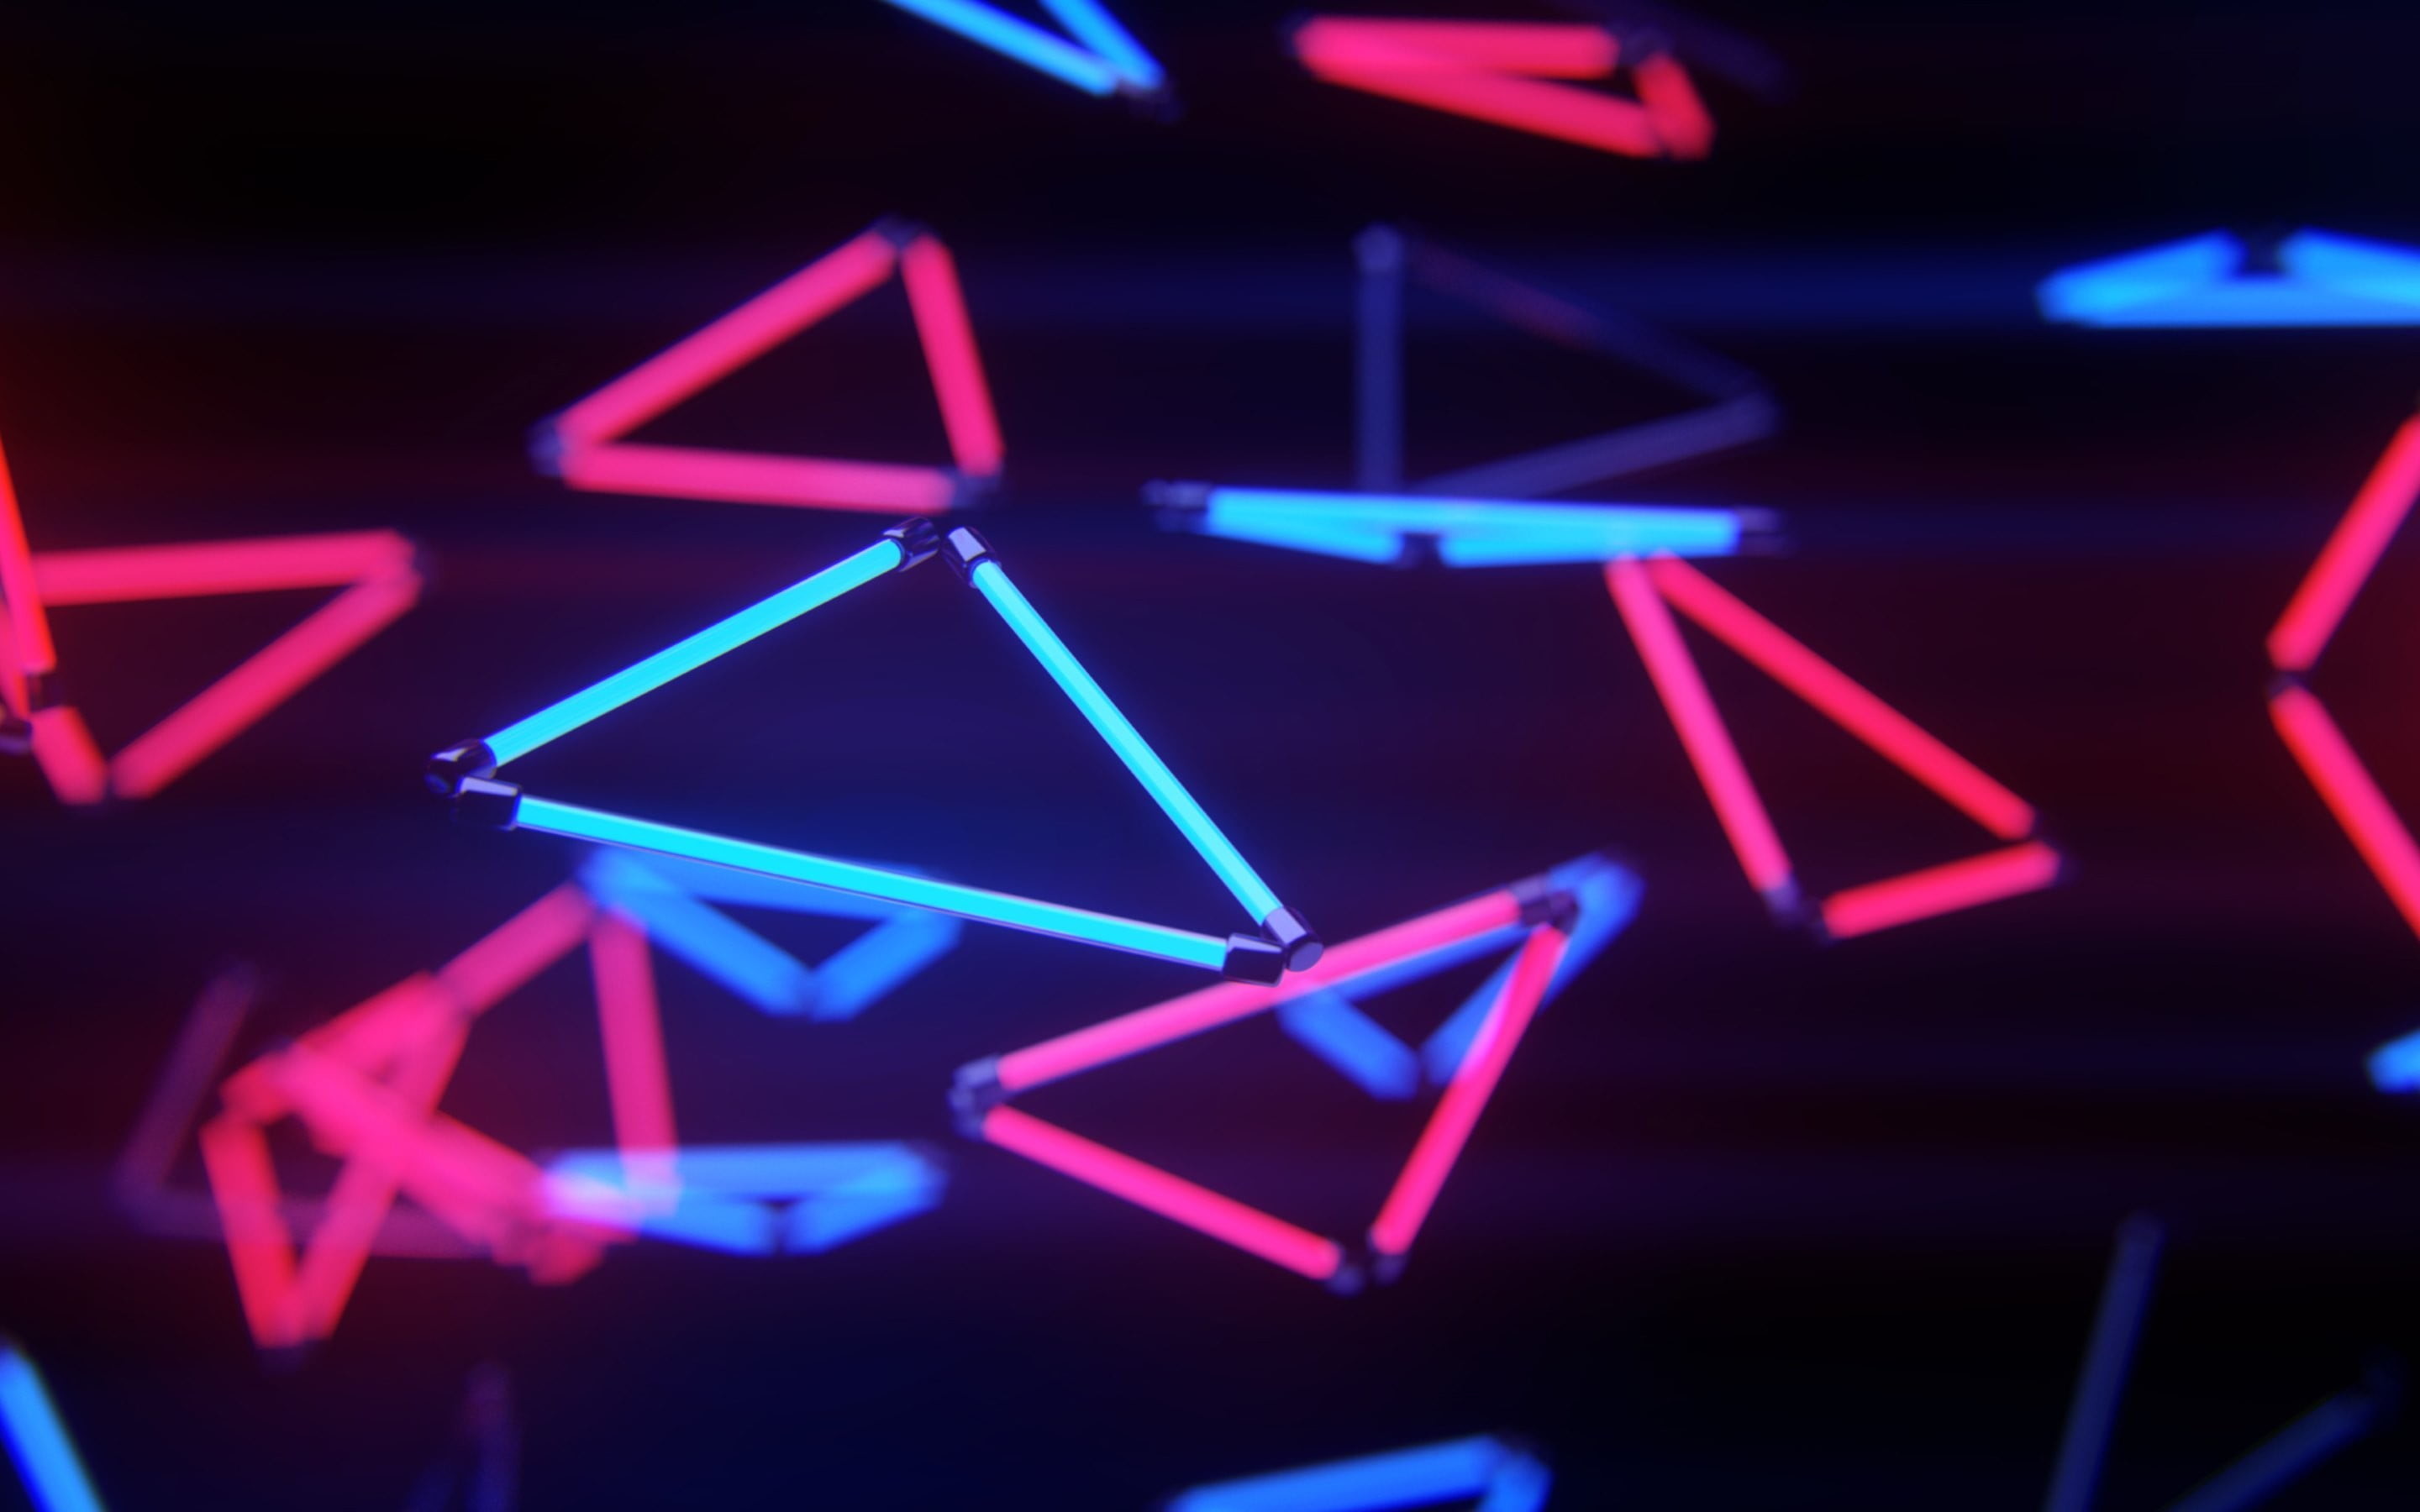 2880x1800 red and blue Led strips, neon, abstract, digital art, 3D, lights